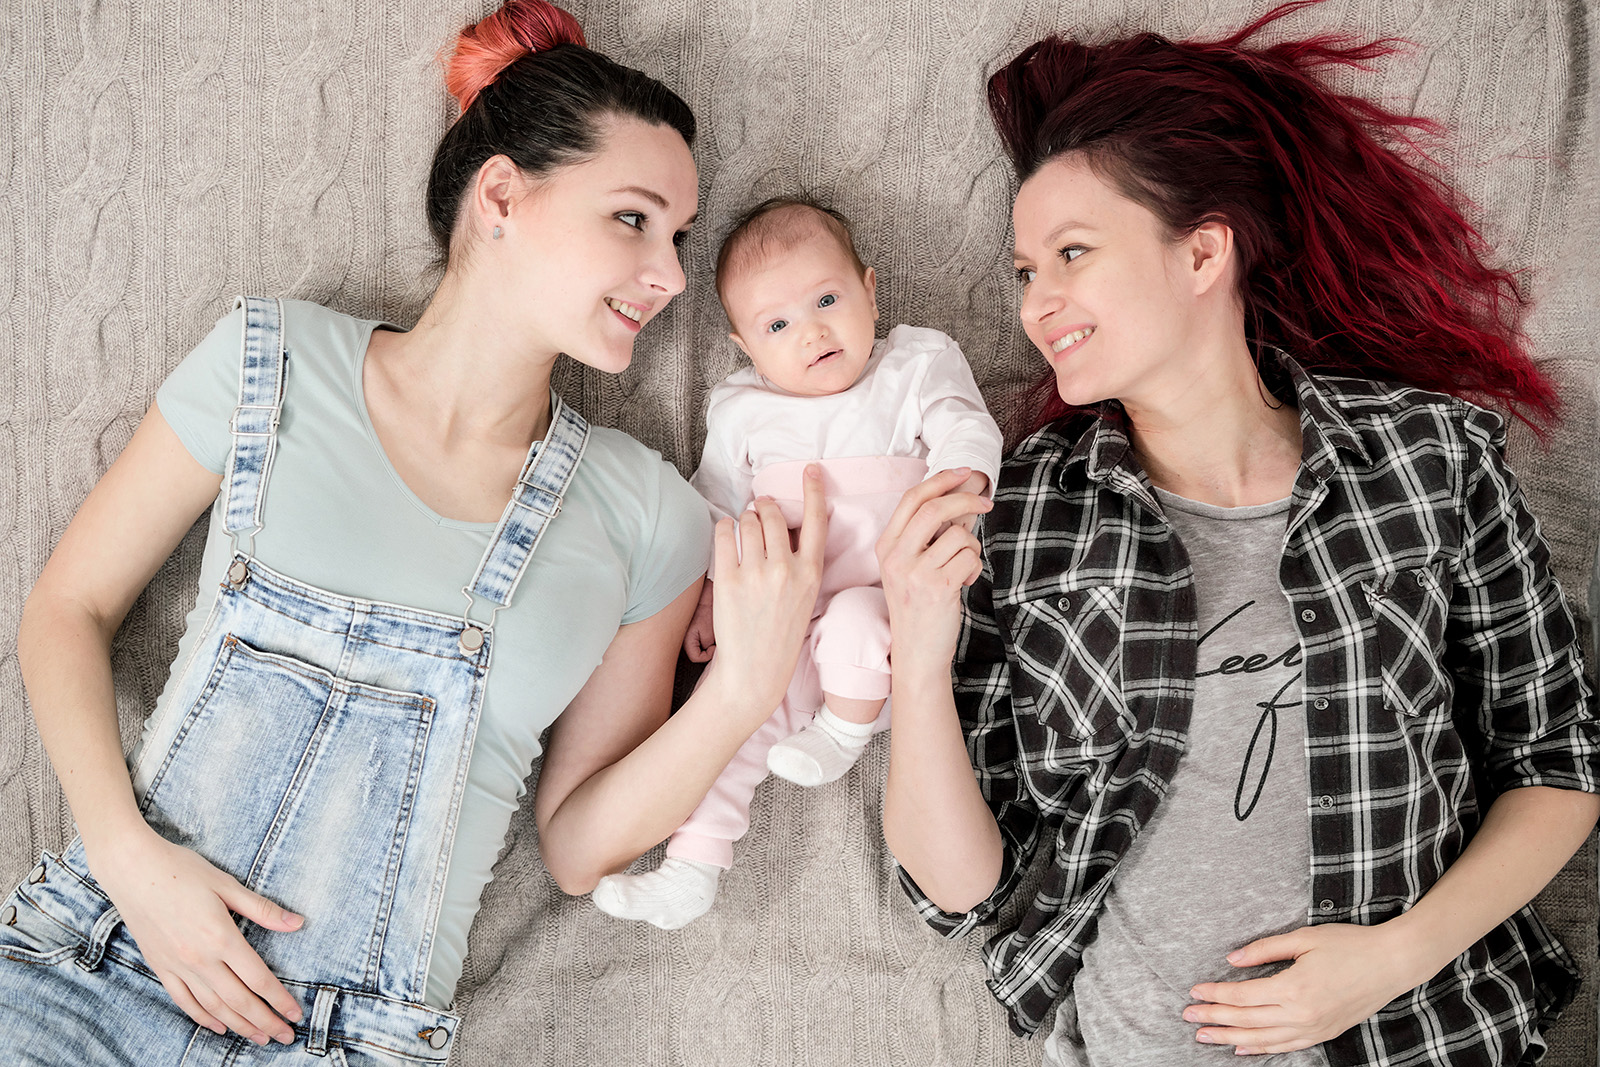 Two young women in casual clothes and with pink hair, a lesbian homosexual couple, lying on a rug with a child. Same-sex marriage, adoption.